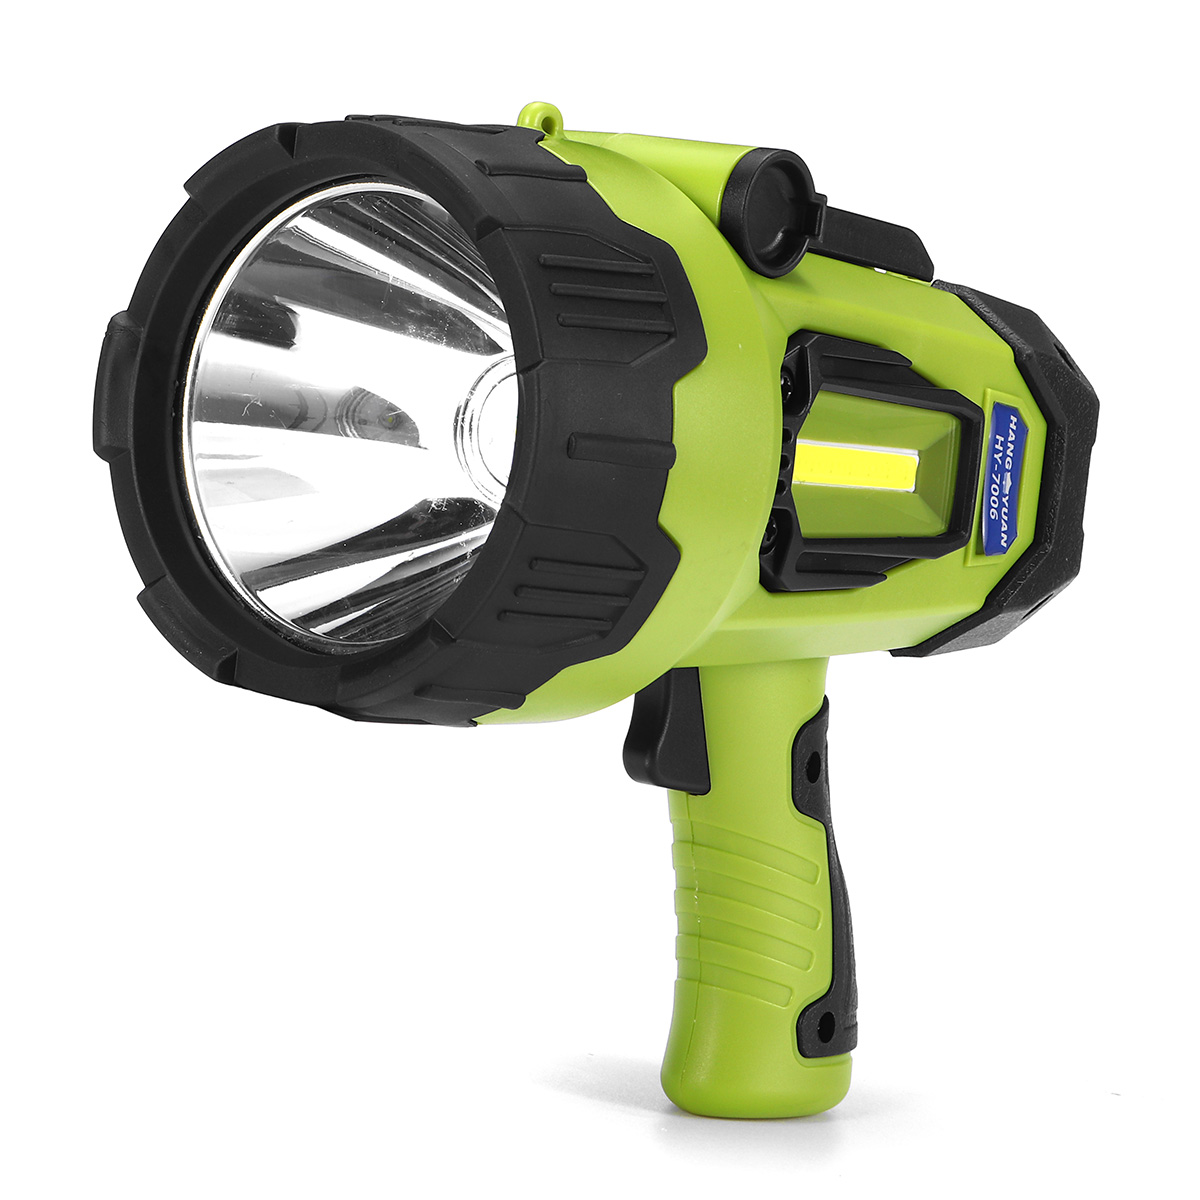 Rechargeable spotlight, Spot lights hand held large flashlight 5000 lumens handheld spotlight Lightweight and Super bright flashlight, for fishing and hunting, forestry, adventure - image 2 of 7